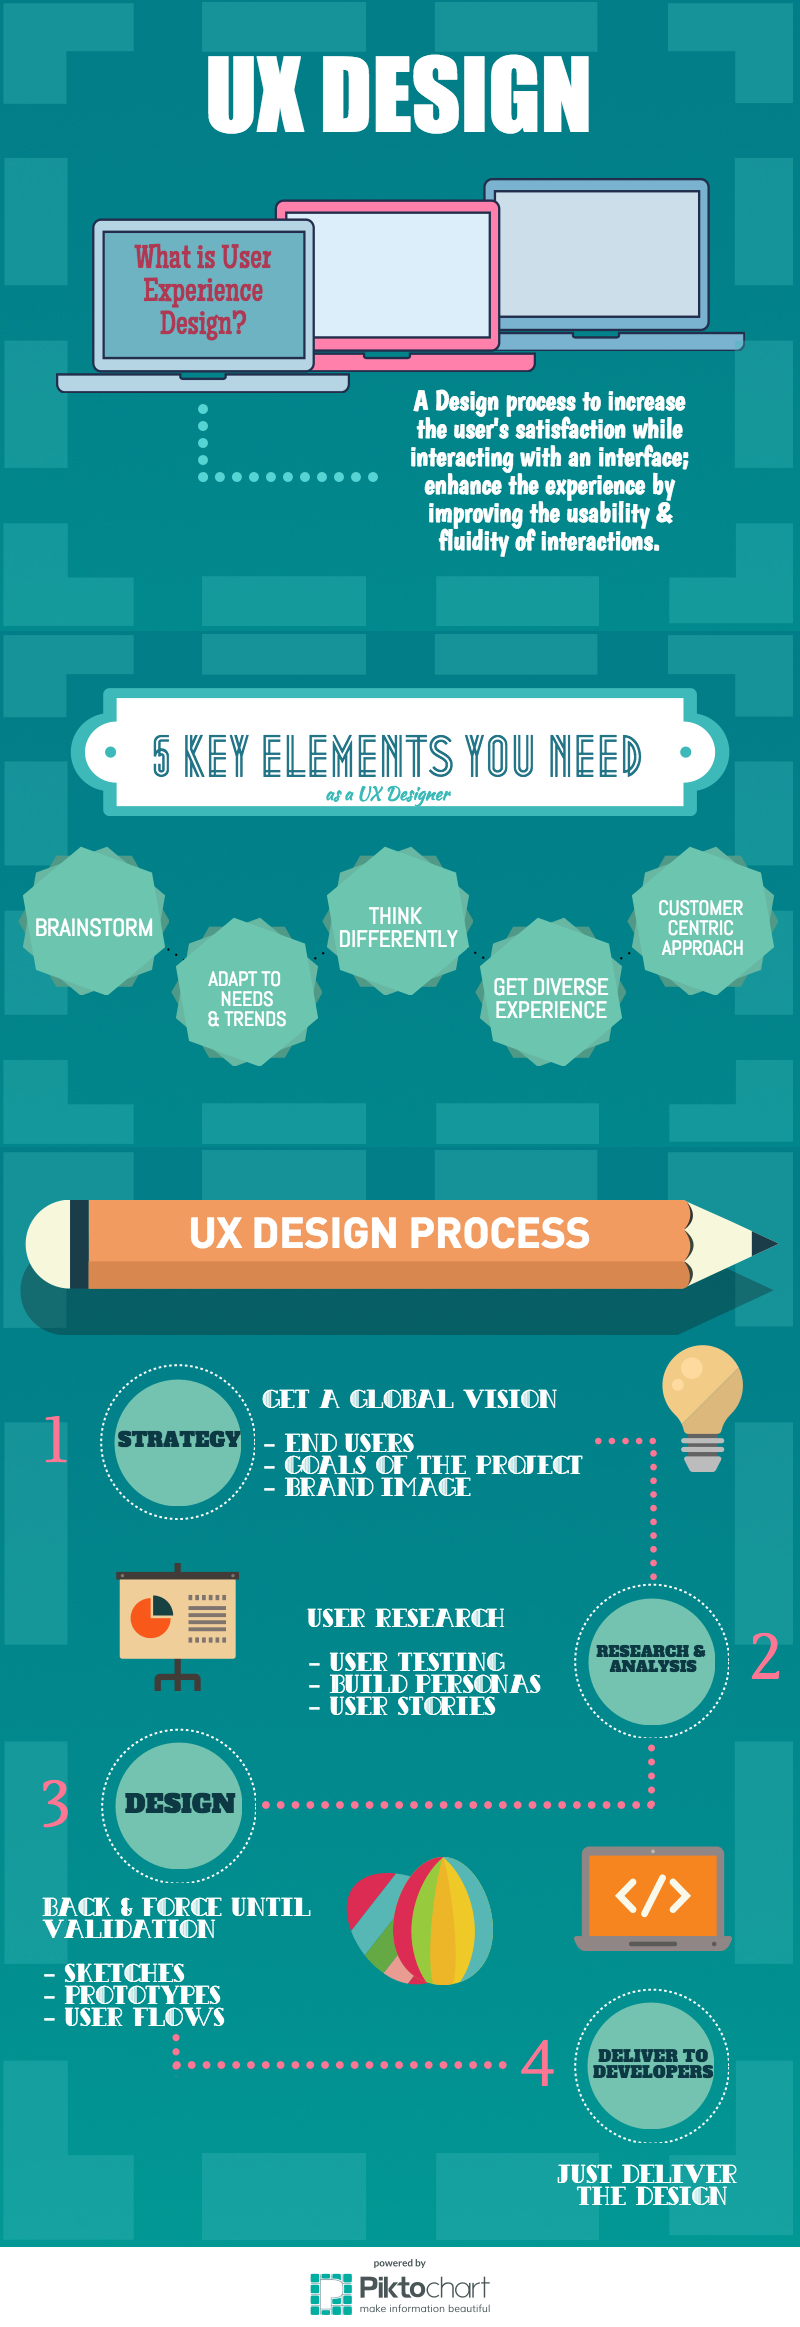 what-is-user-experience-design-infographic.png